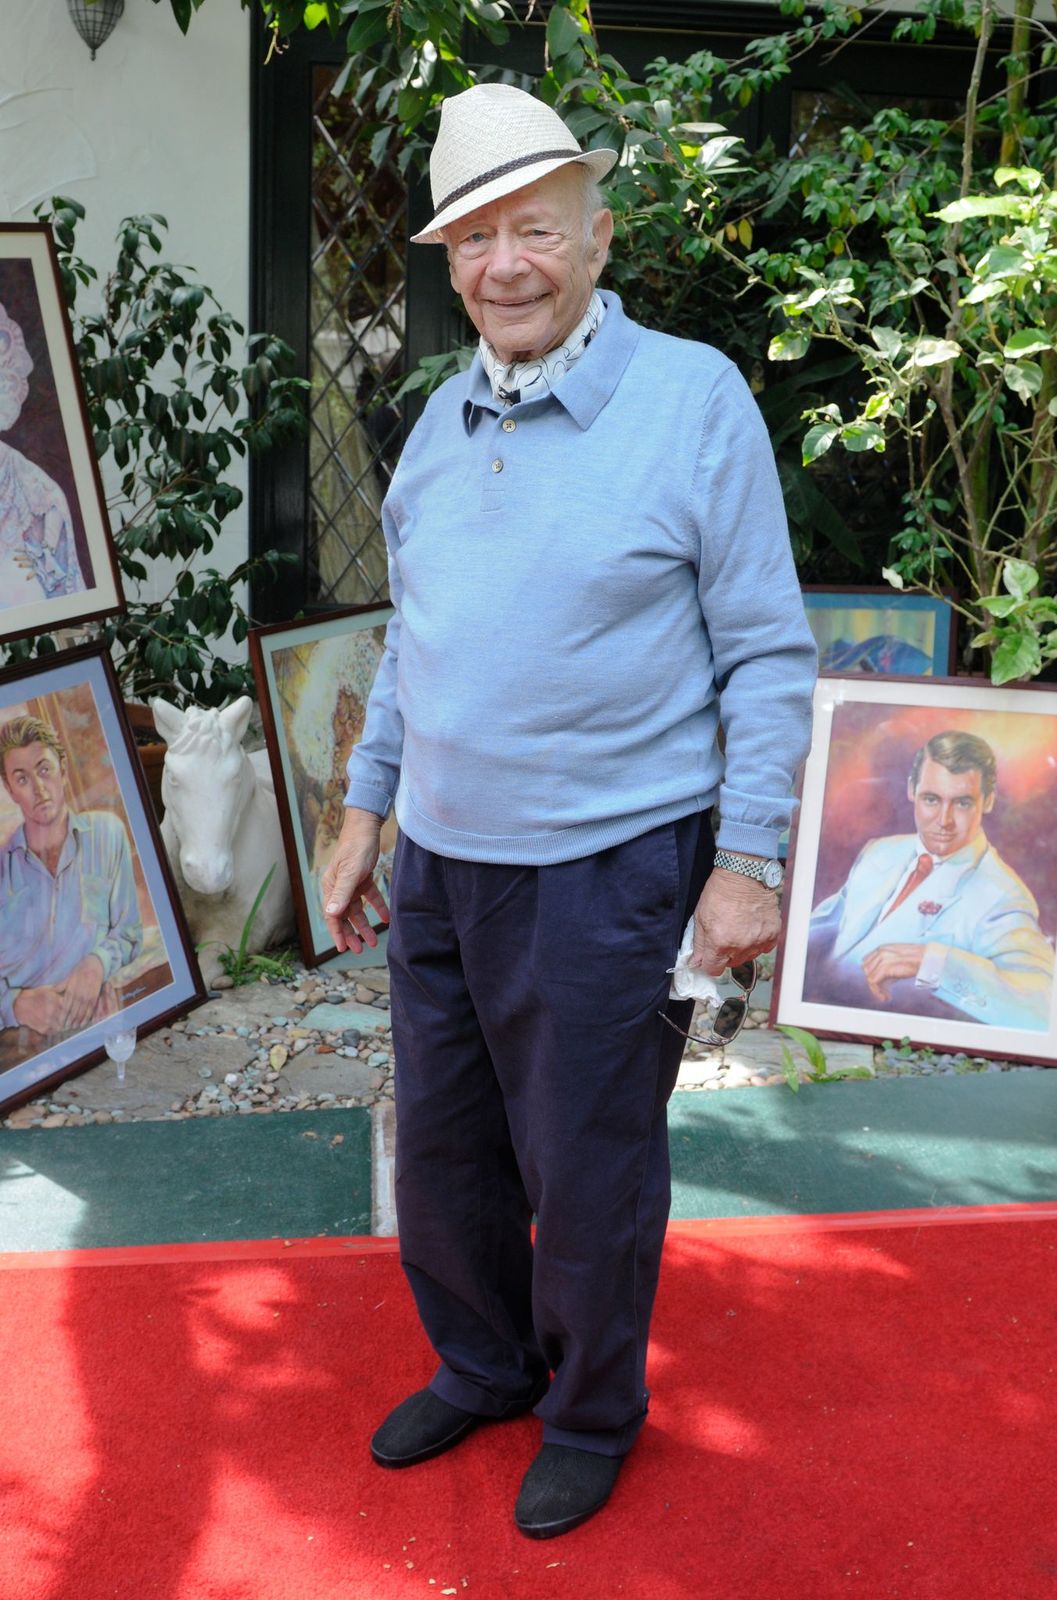 Allan Rich at the 2nd Annual Celebrity Garden Party Fundraiser Memorabilia Auction For Motion Picture Home on September 29, 2012, in Beverly Hills, California | Photo: Vivien Killilea/WireImage/Getty Images